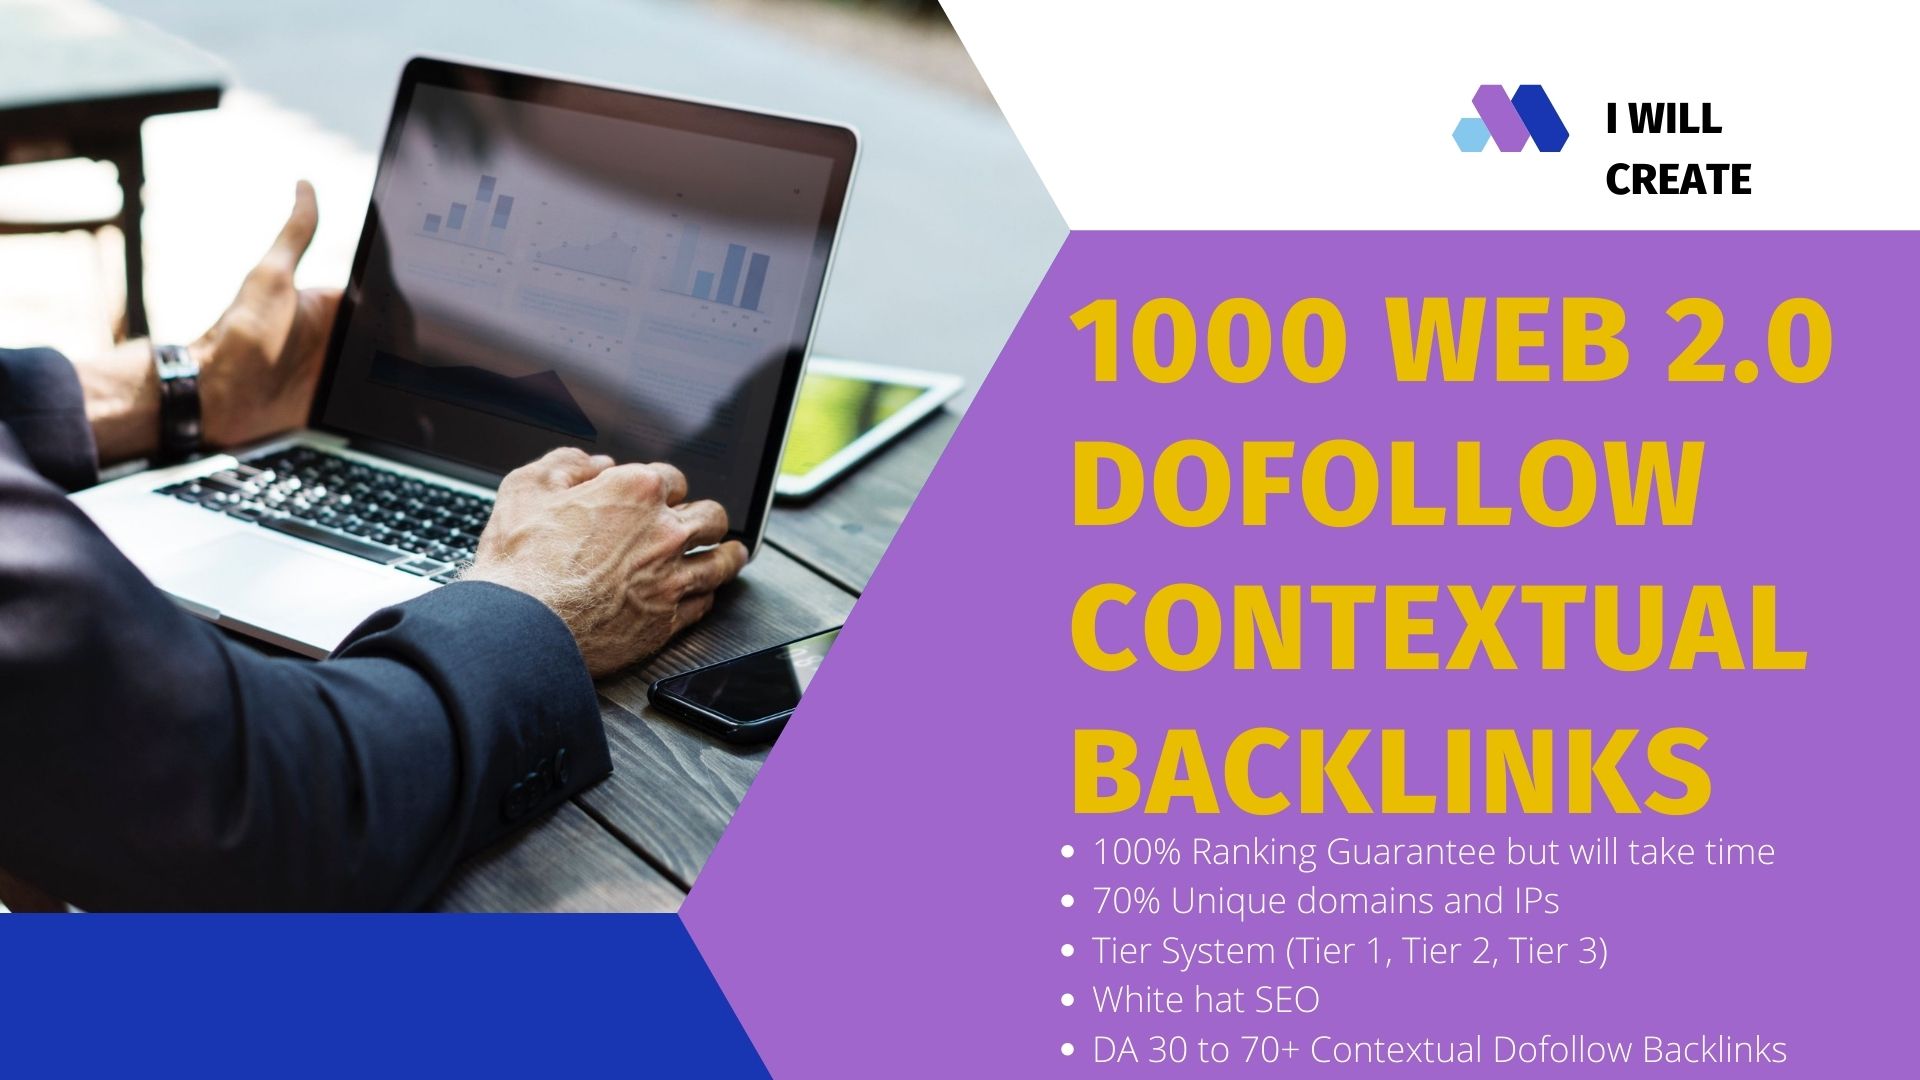 Get 1000 WEB 2.0 Dofollow Contextual Backlinks White Hat SEO for your website